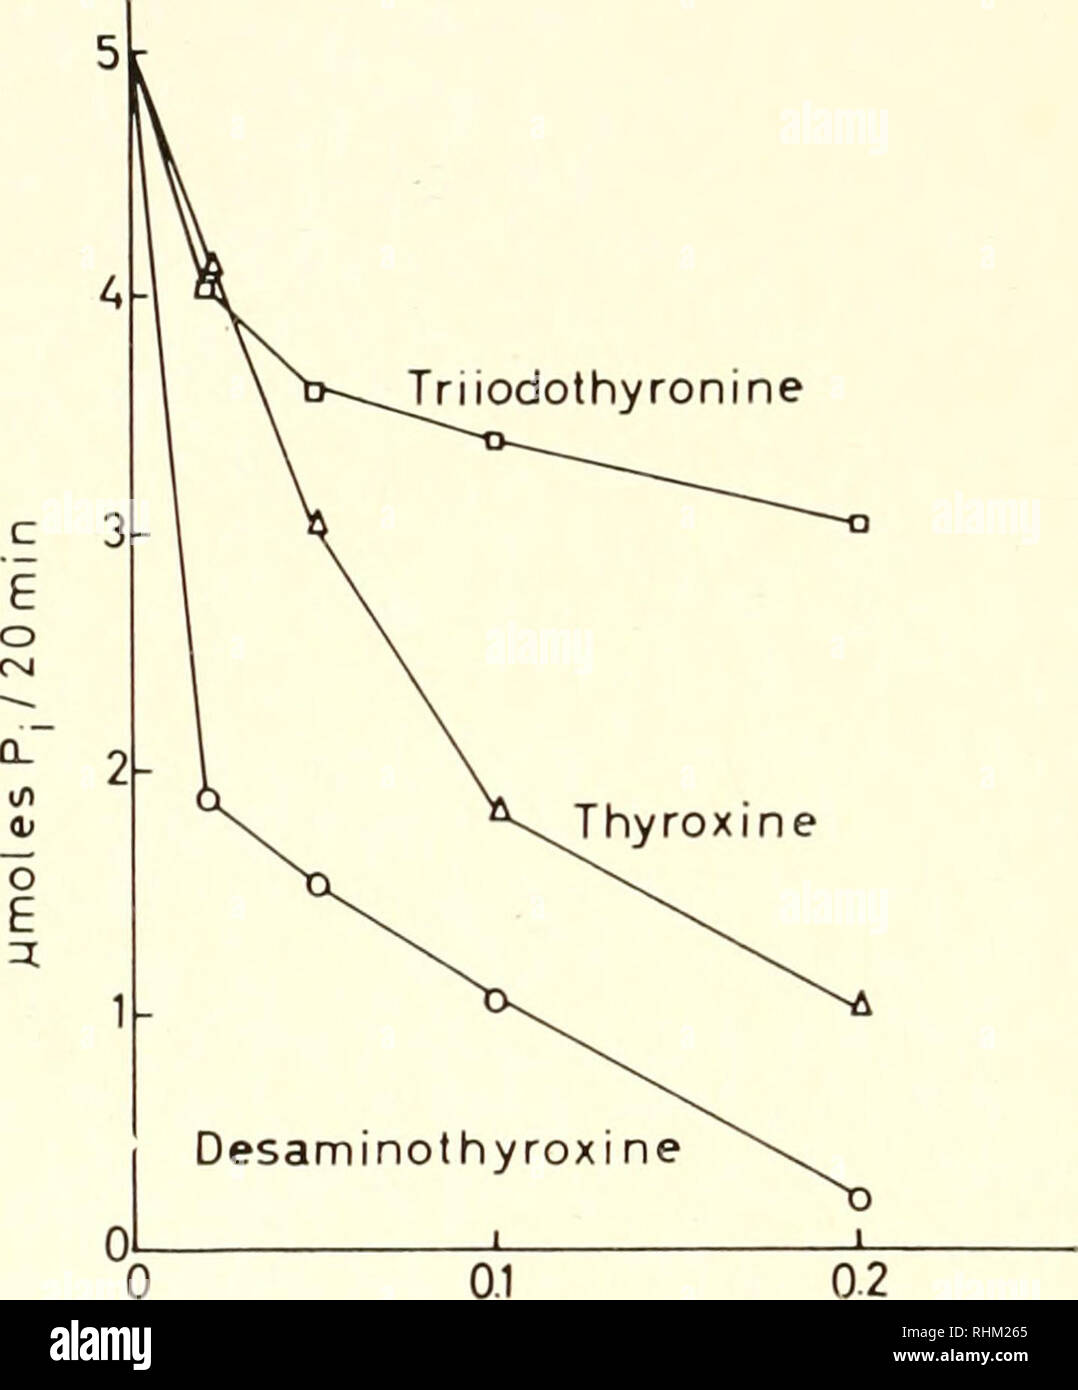 . Biological structure and function; proceedings. Biochemistry; Cytology. 8 OLOV LINDBERG et al. Inhibition of dinitrophenol- and Mg + ^-activated A TPases by thyroxine and rehited compounds In Fig. I, the effects of thyroxine, triiodothyronine and desamino- thyroxine on the dinitrophenol induced ATPase of rat Hver mitochondria are illustrated. Of the three compounds, desaminothyroxine exhibited the strongest inhibition, giving half-inhibition at a concentration of about 0-02 mM. The effect of the same compounds on the Mg + +-acti- vated ATPase is shown in Fig. 2. For the study of this reactio Stock Photo